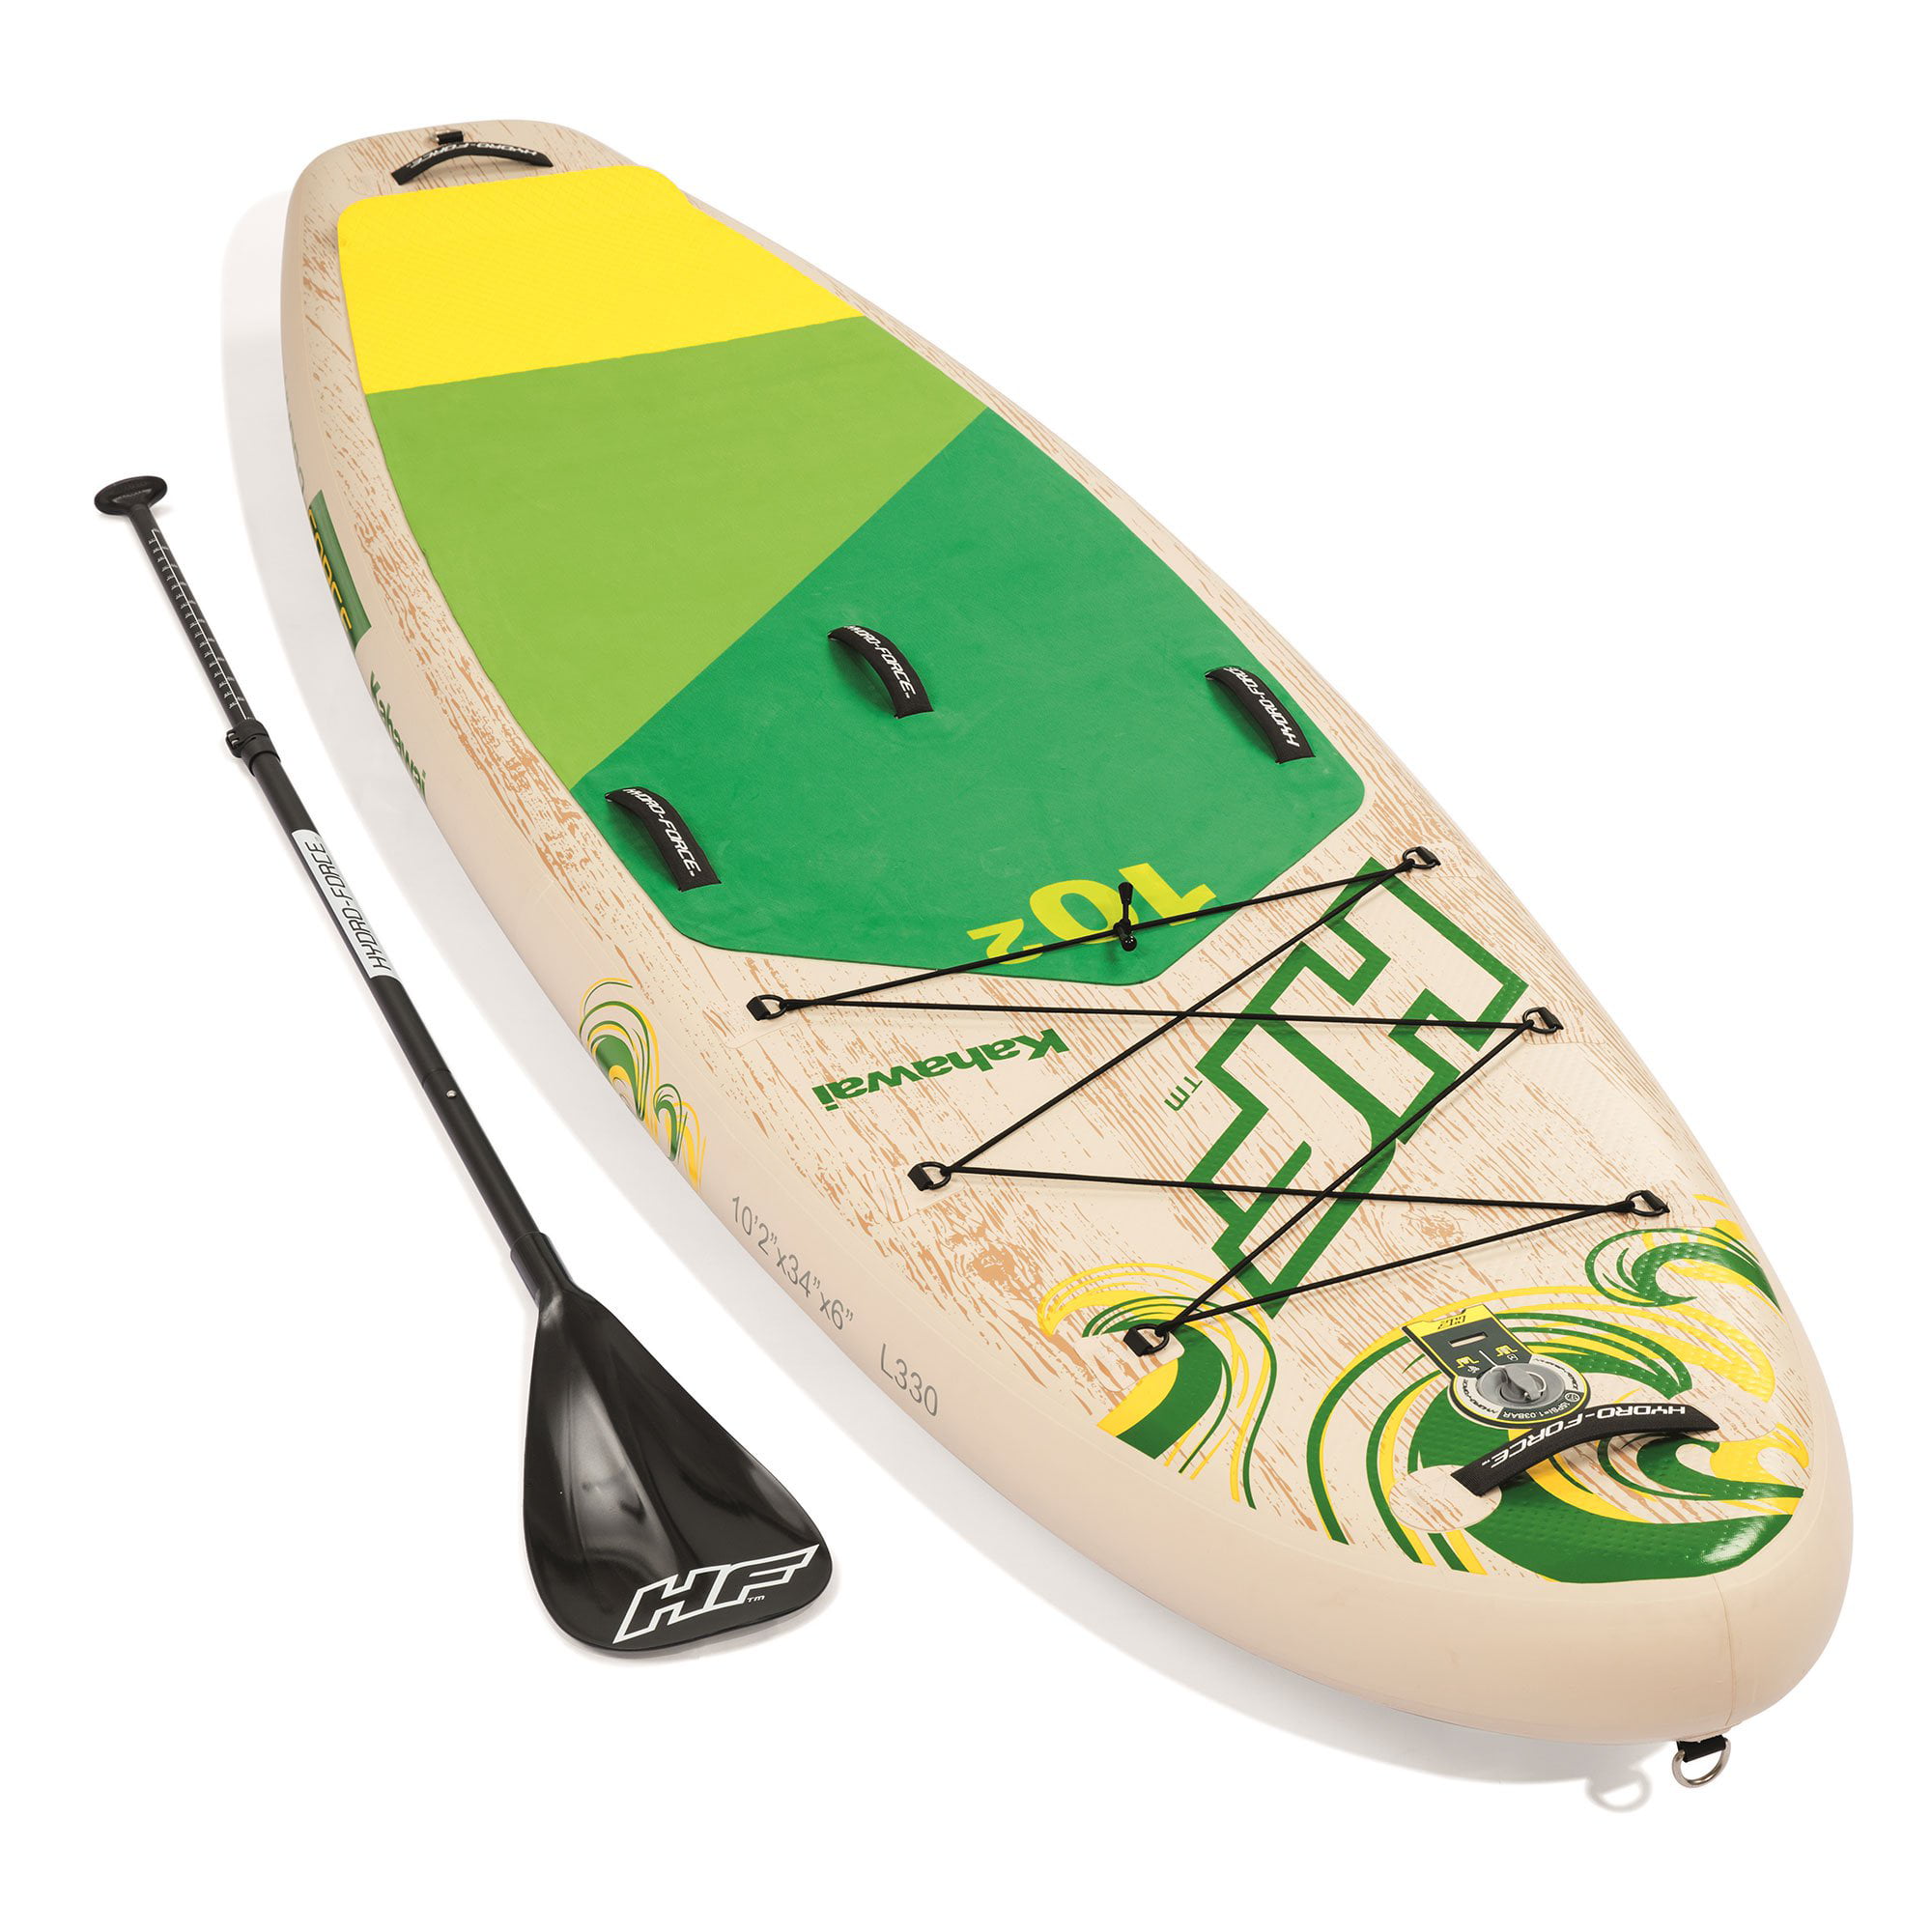 Trans Ladies Men's Sup Stand up Paddle Board Inflatable Complete 10 10,5 11,5 